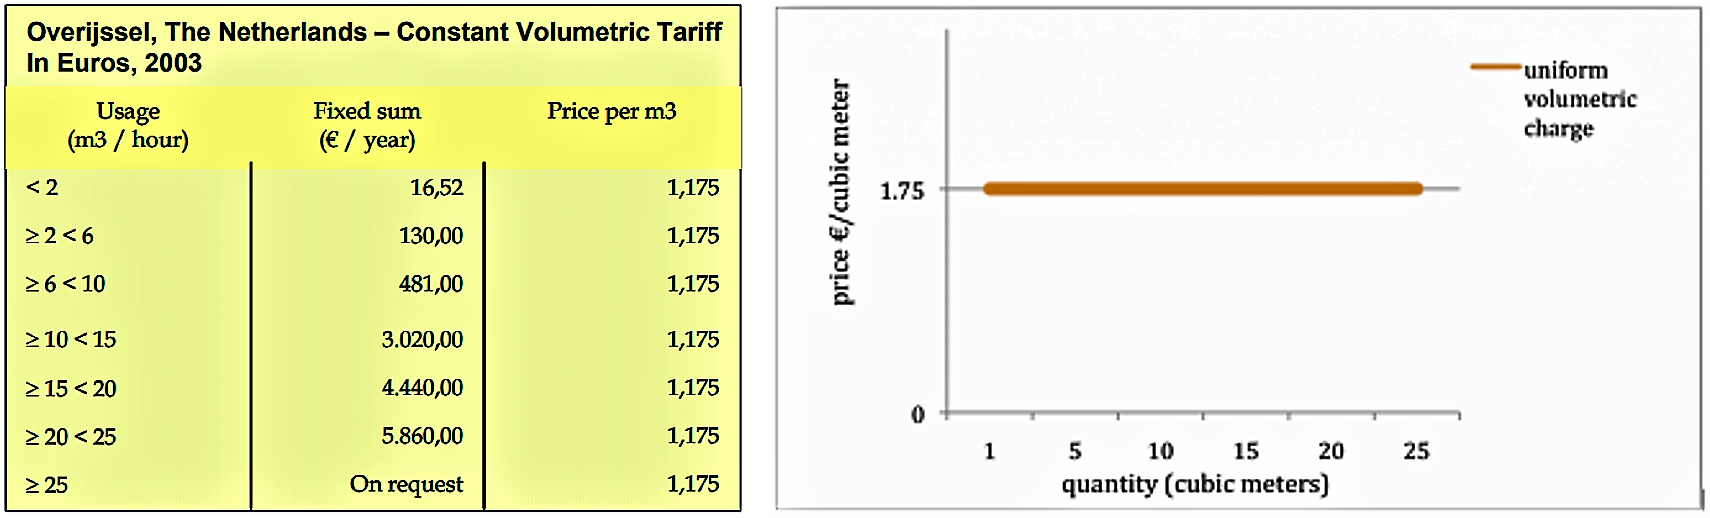 Price of water versus the quantity of water used. Both graph and table show how the price per unit of water remains constant independently of the use. Source: CARDONE & FONSECA (2003)